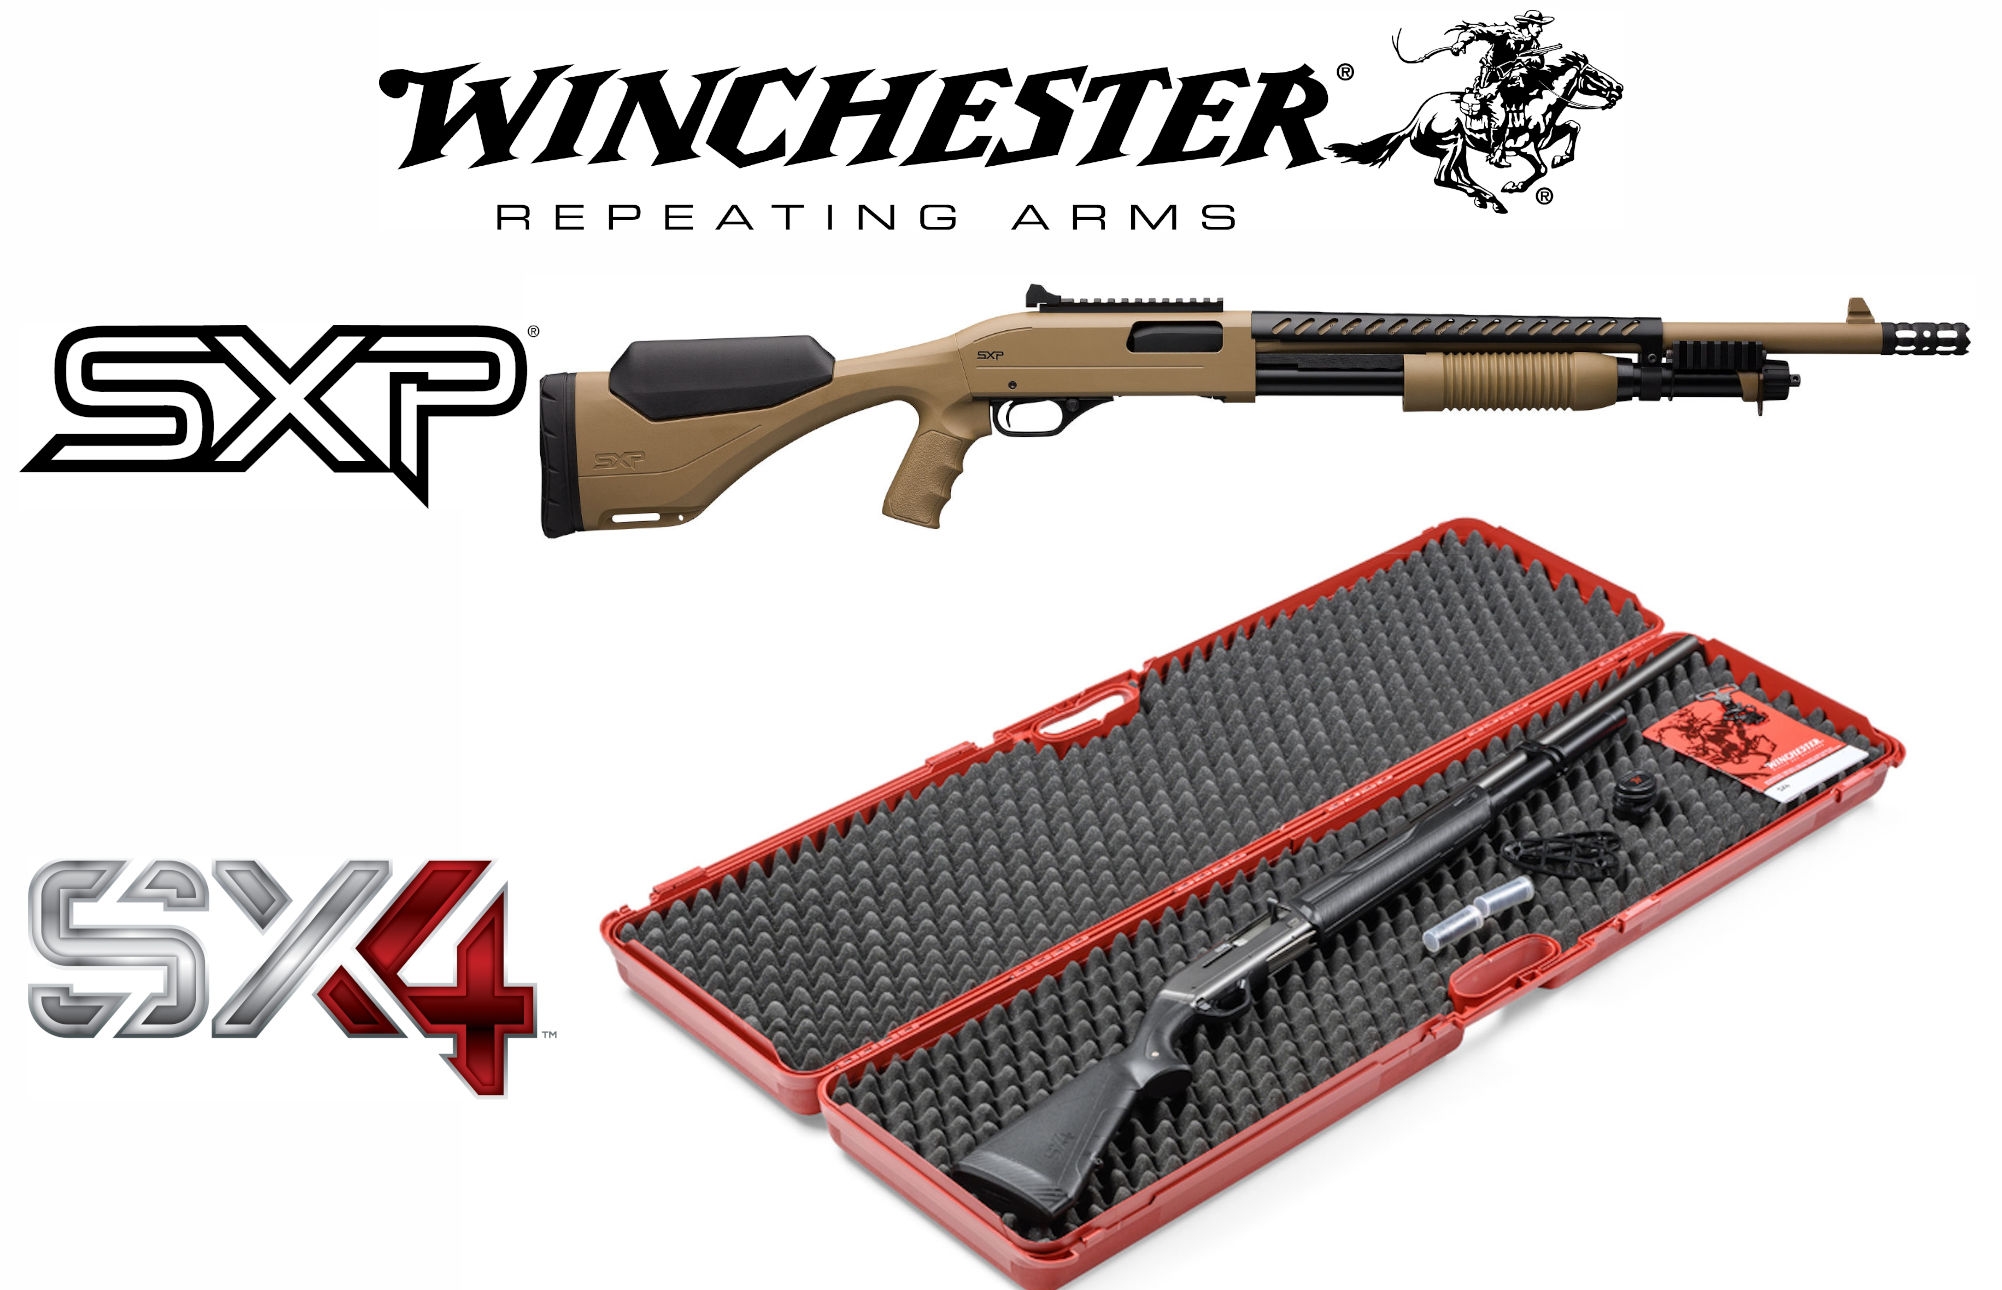 New semi-automatic and pump-action shotguns: Winchester SX4 and SXP all4sho...